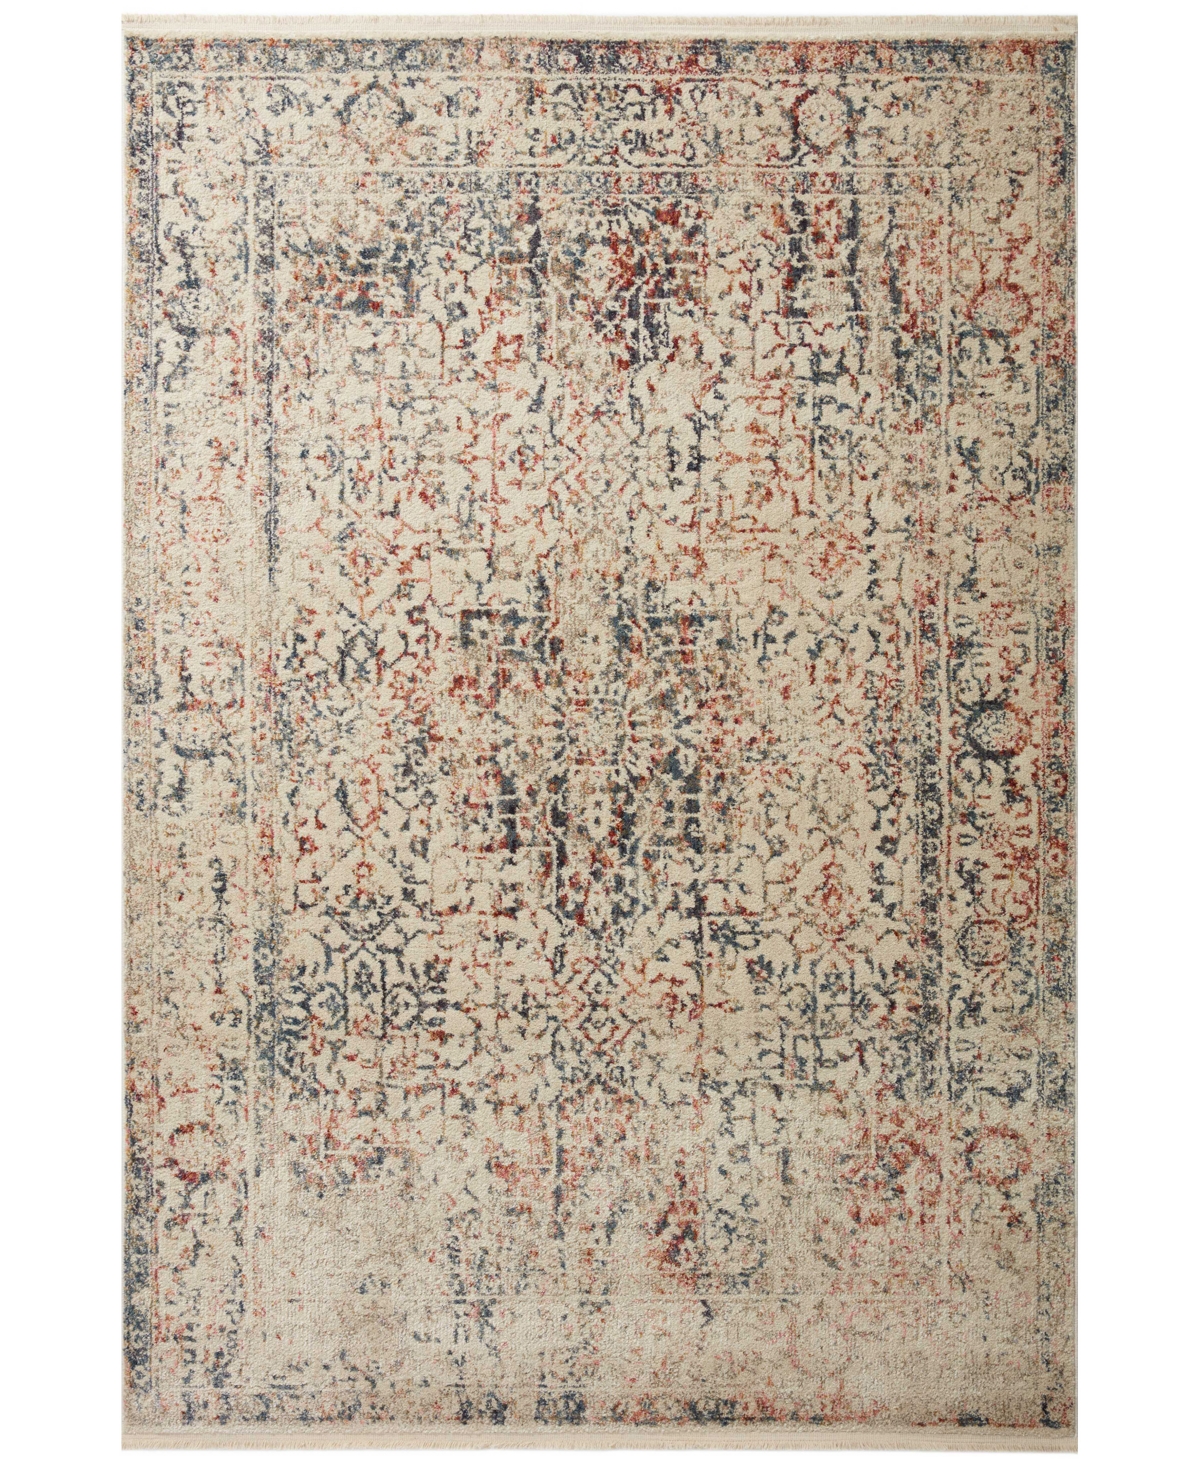 Magnolia Home By Joanna Gaines X Loloi Janey Jay-04 2'7" X 4' Area Rug In Ivory